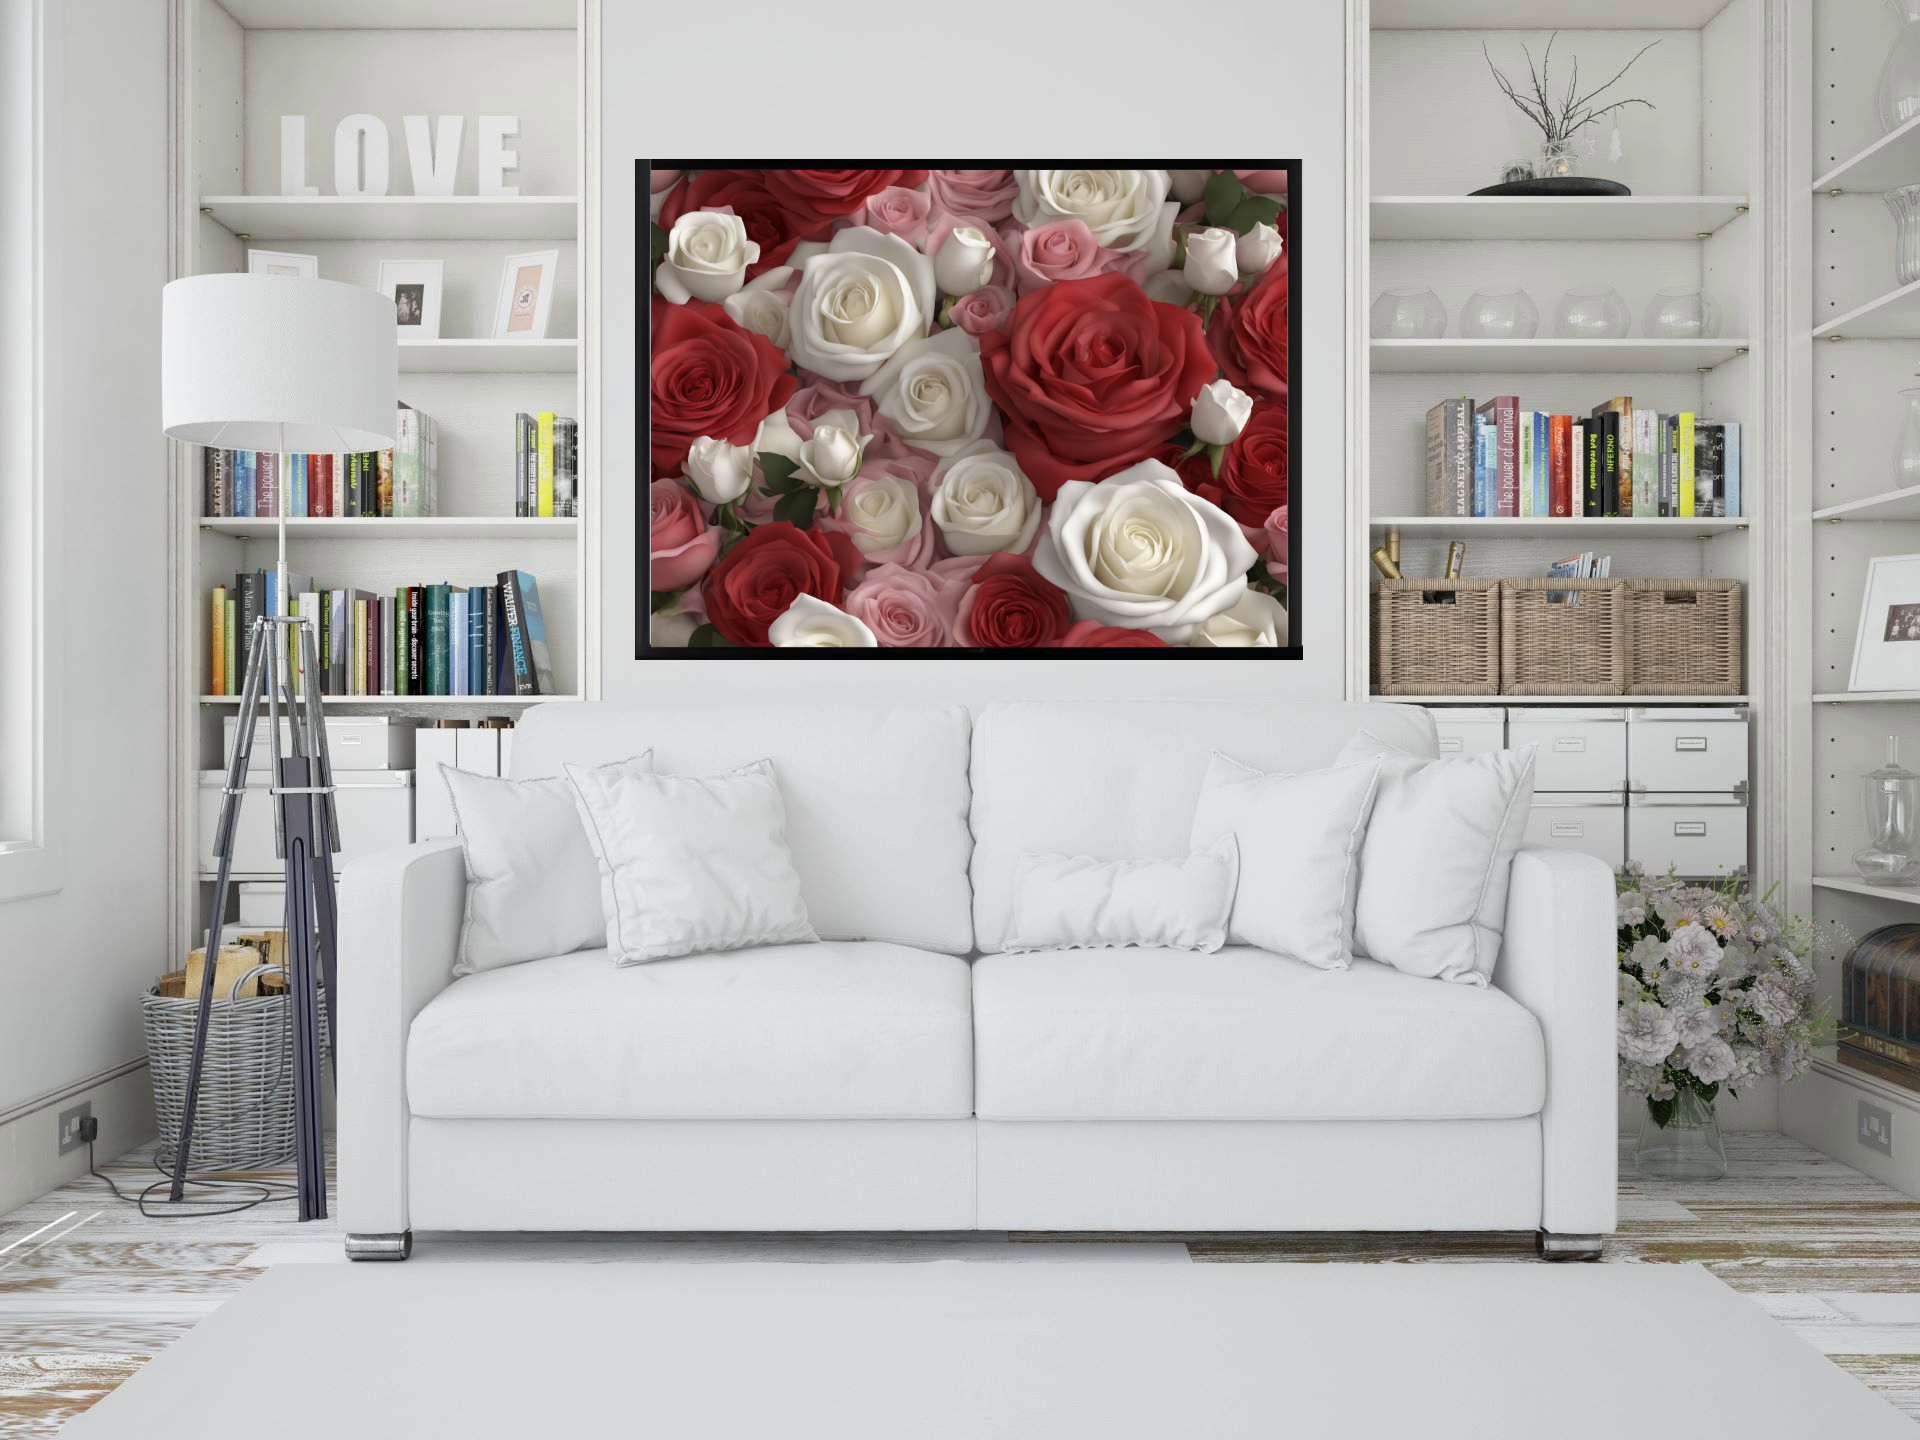 Wall Art ROSES Canvas Print Art Deco Painting Original Giclee 40X30 + Frame Love Flower Minimalist Beauty Fun Design Fit House Home Office Gift Ready Hang